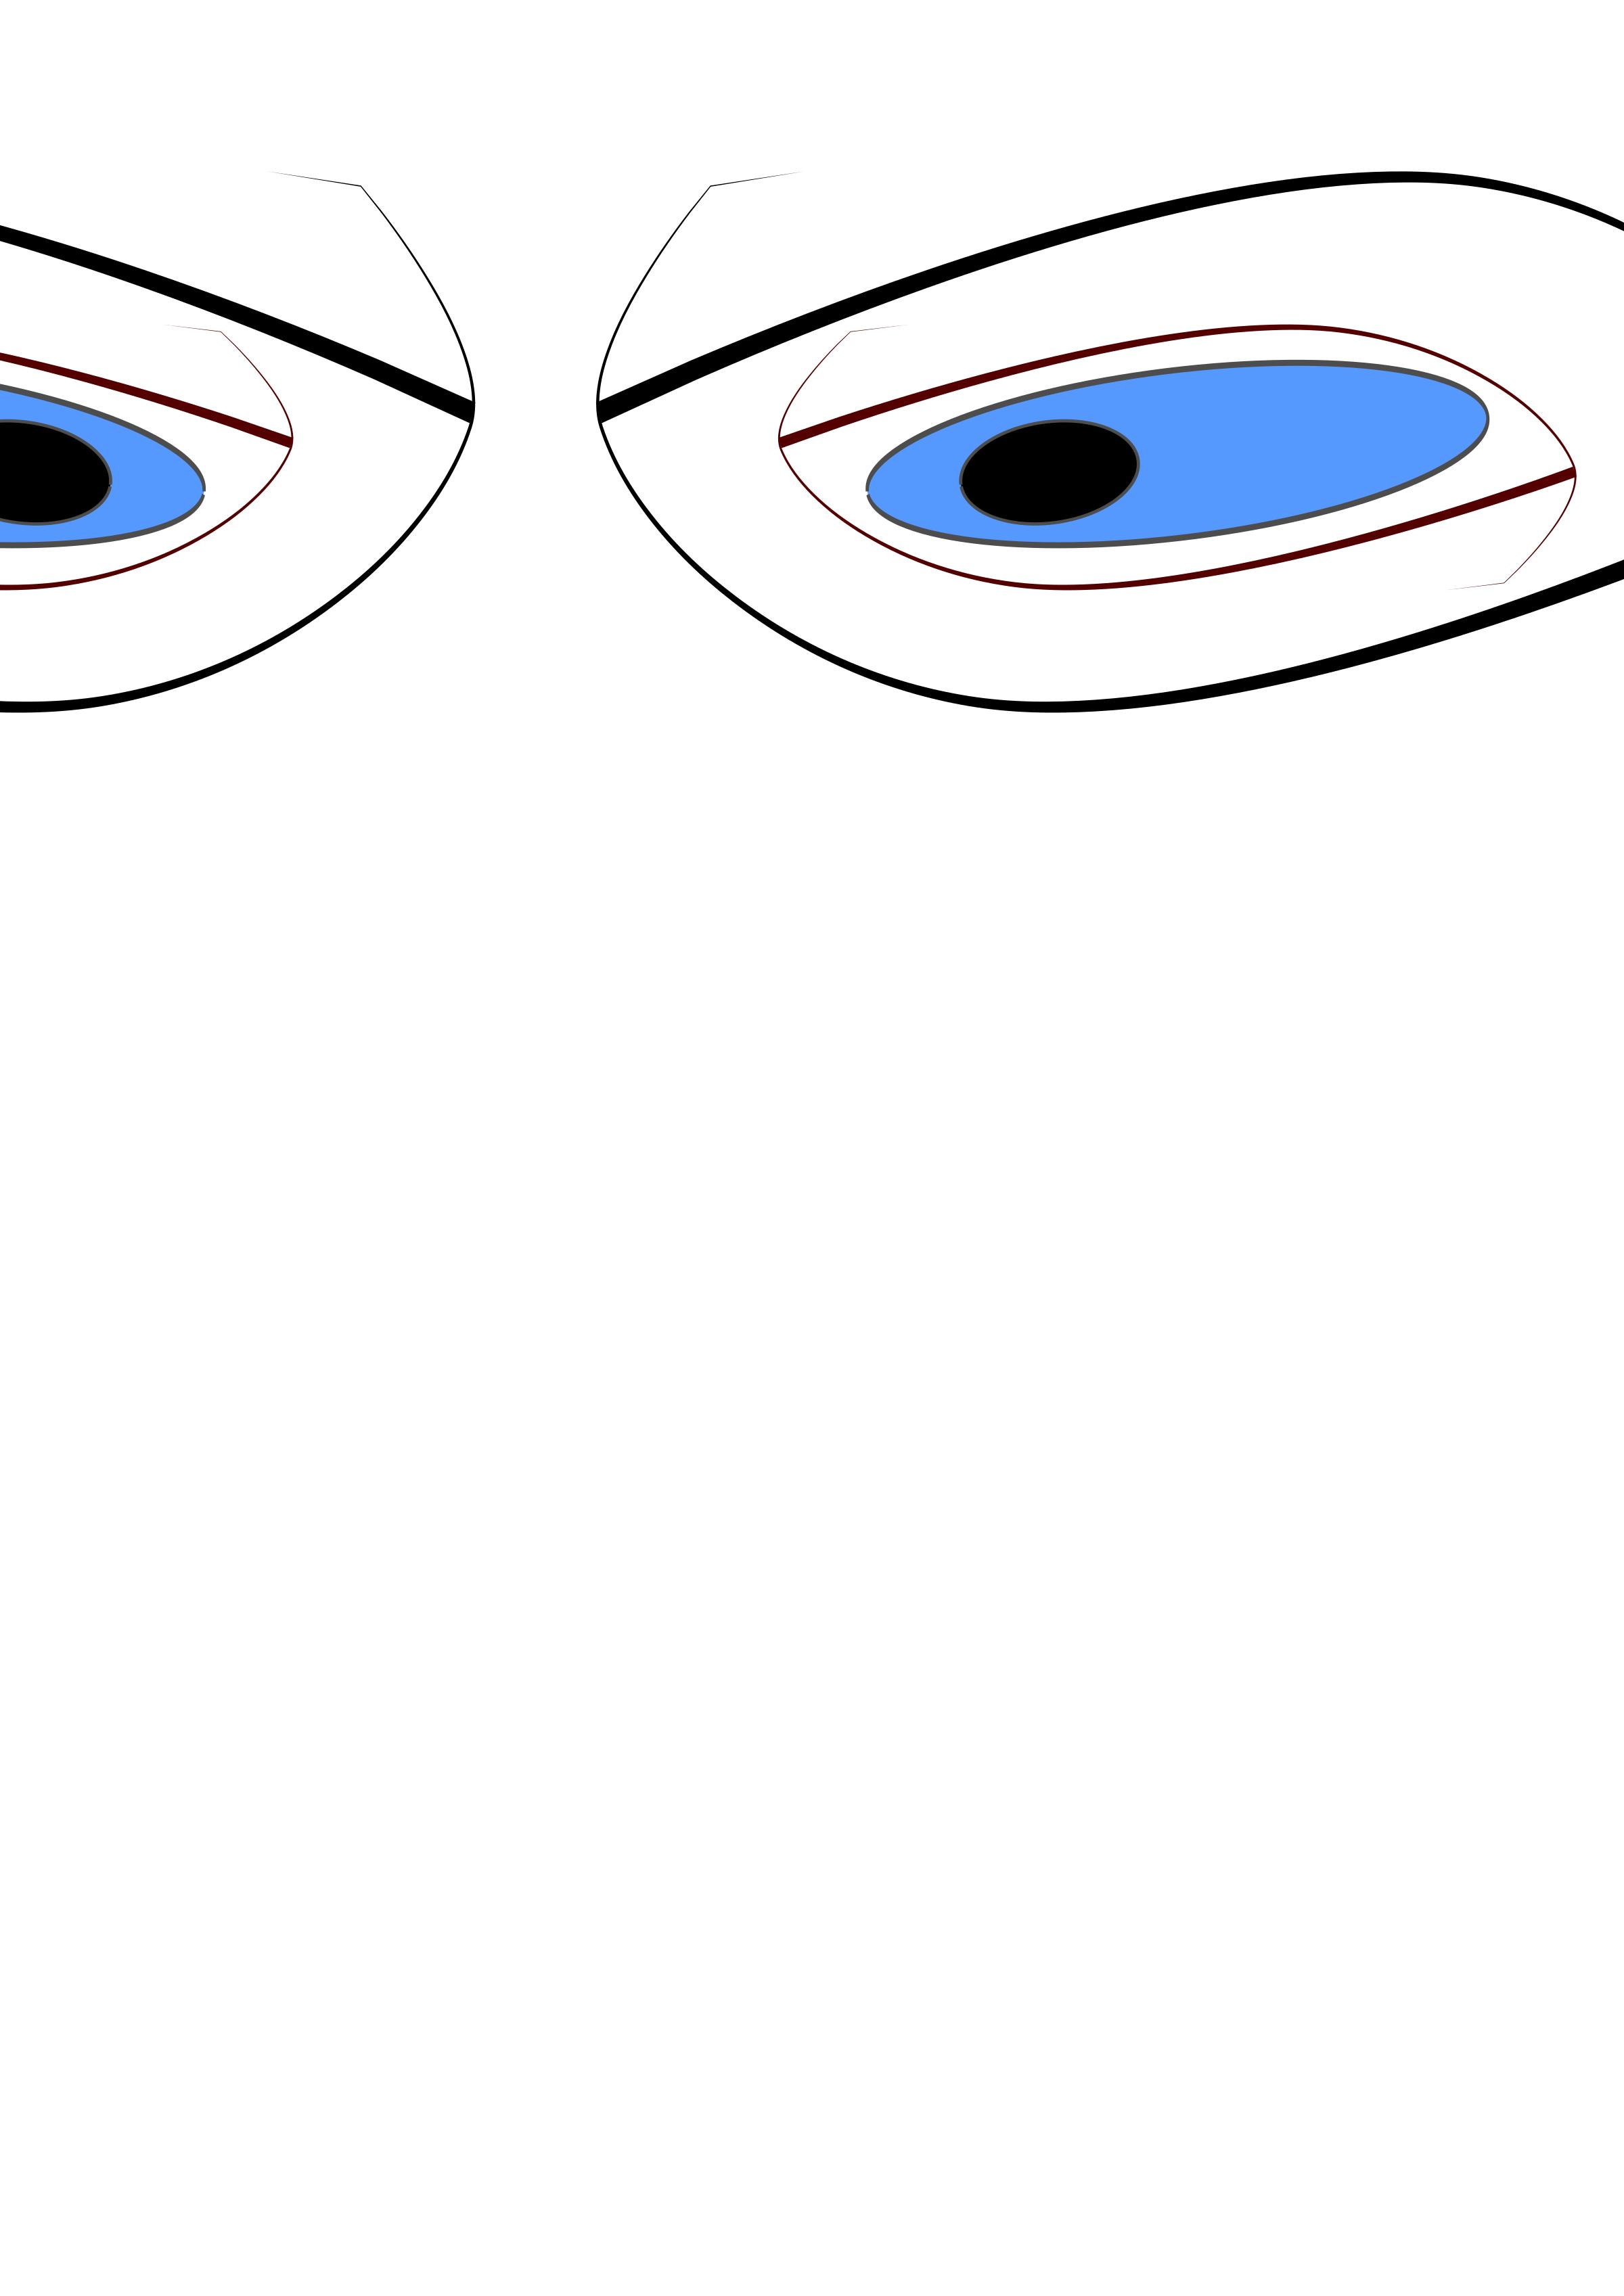 Pair of bad eyes PNG icons